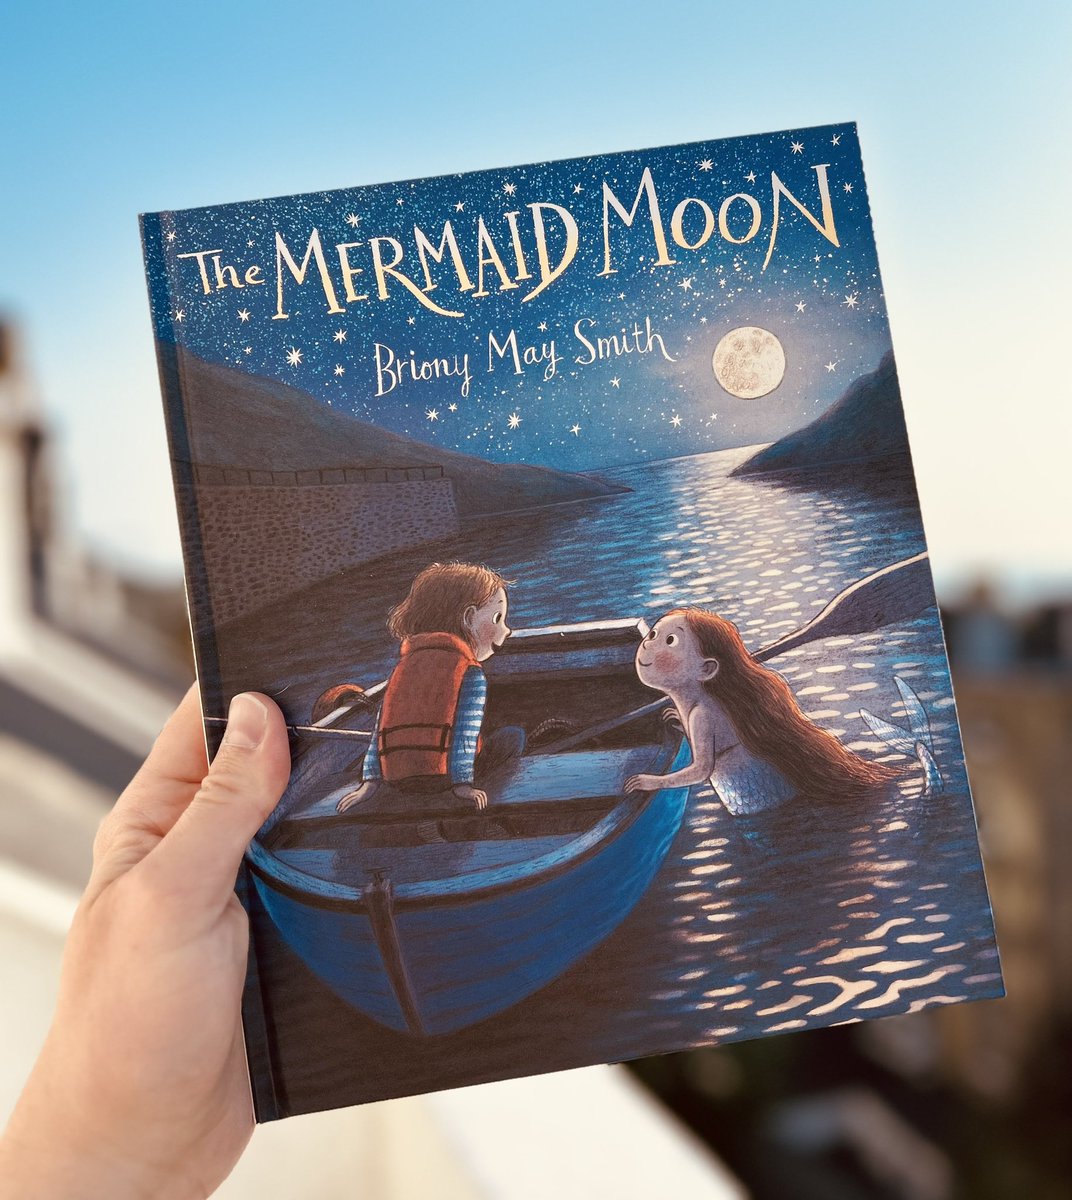 @Booktrust ALL the illustrations in The Mermaid Moon by @BrionyMaySmith are STUNNING. But you'll have to buy the book to see the magical flying whale spread at the end 😳😳😳